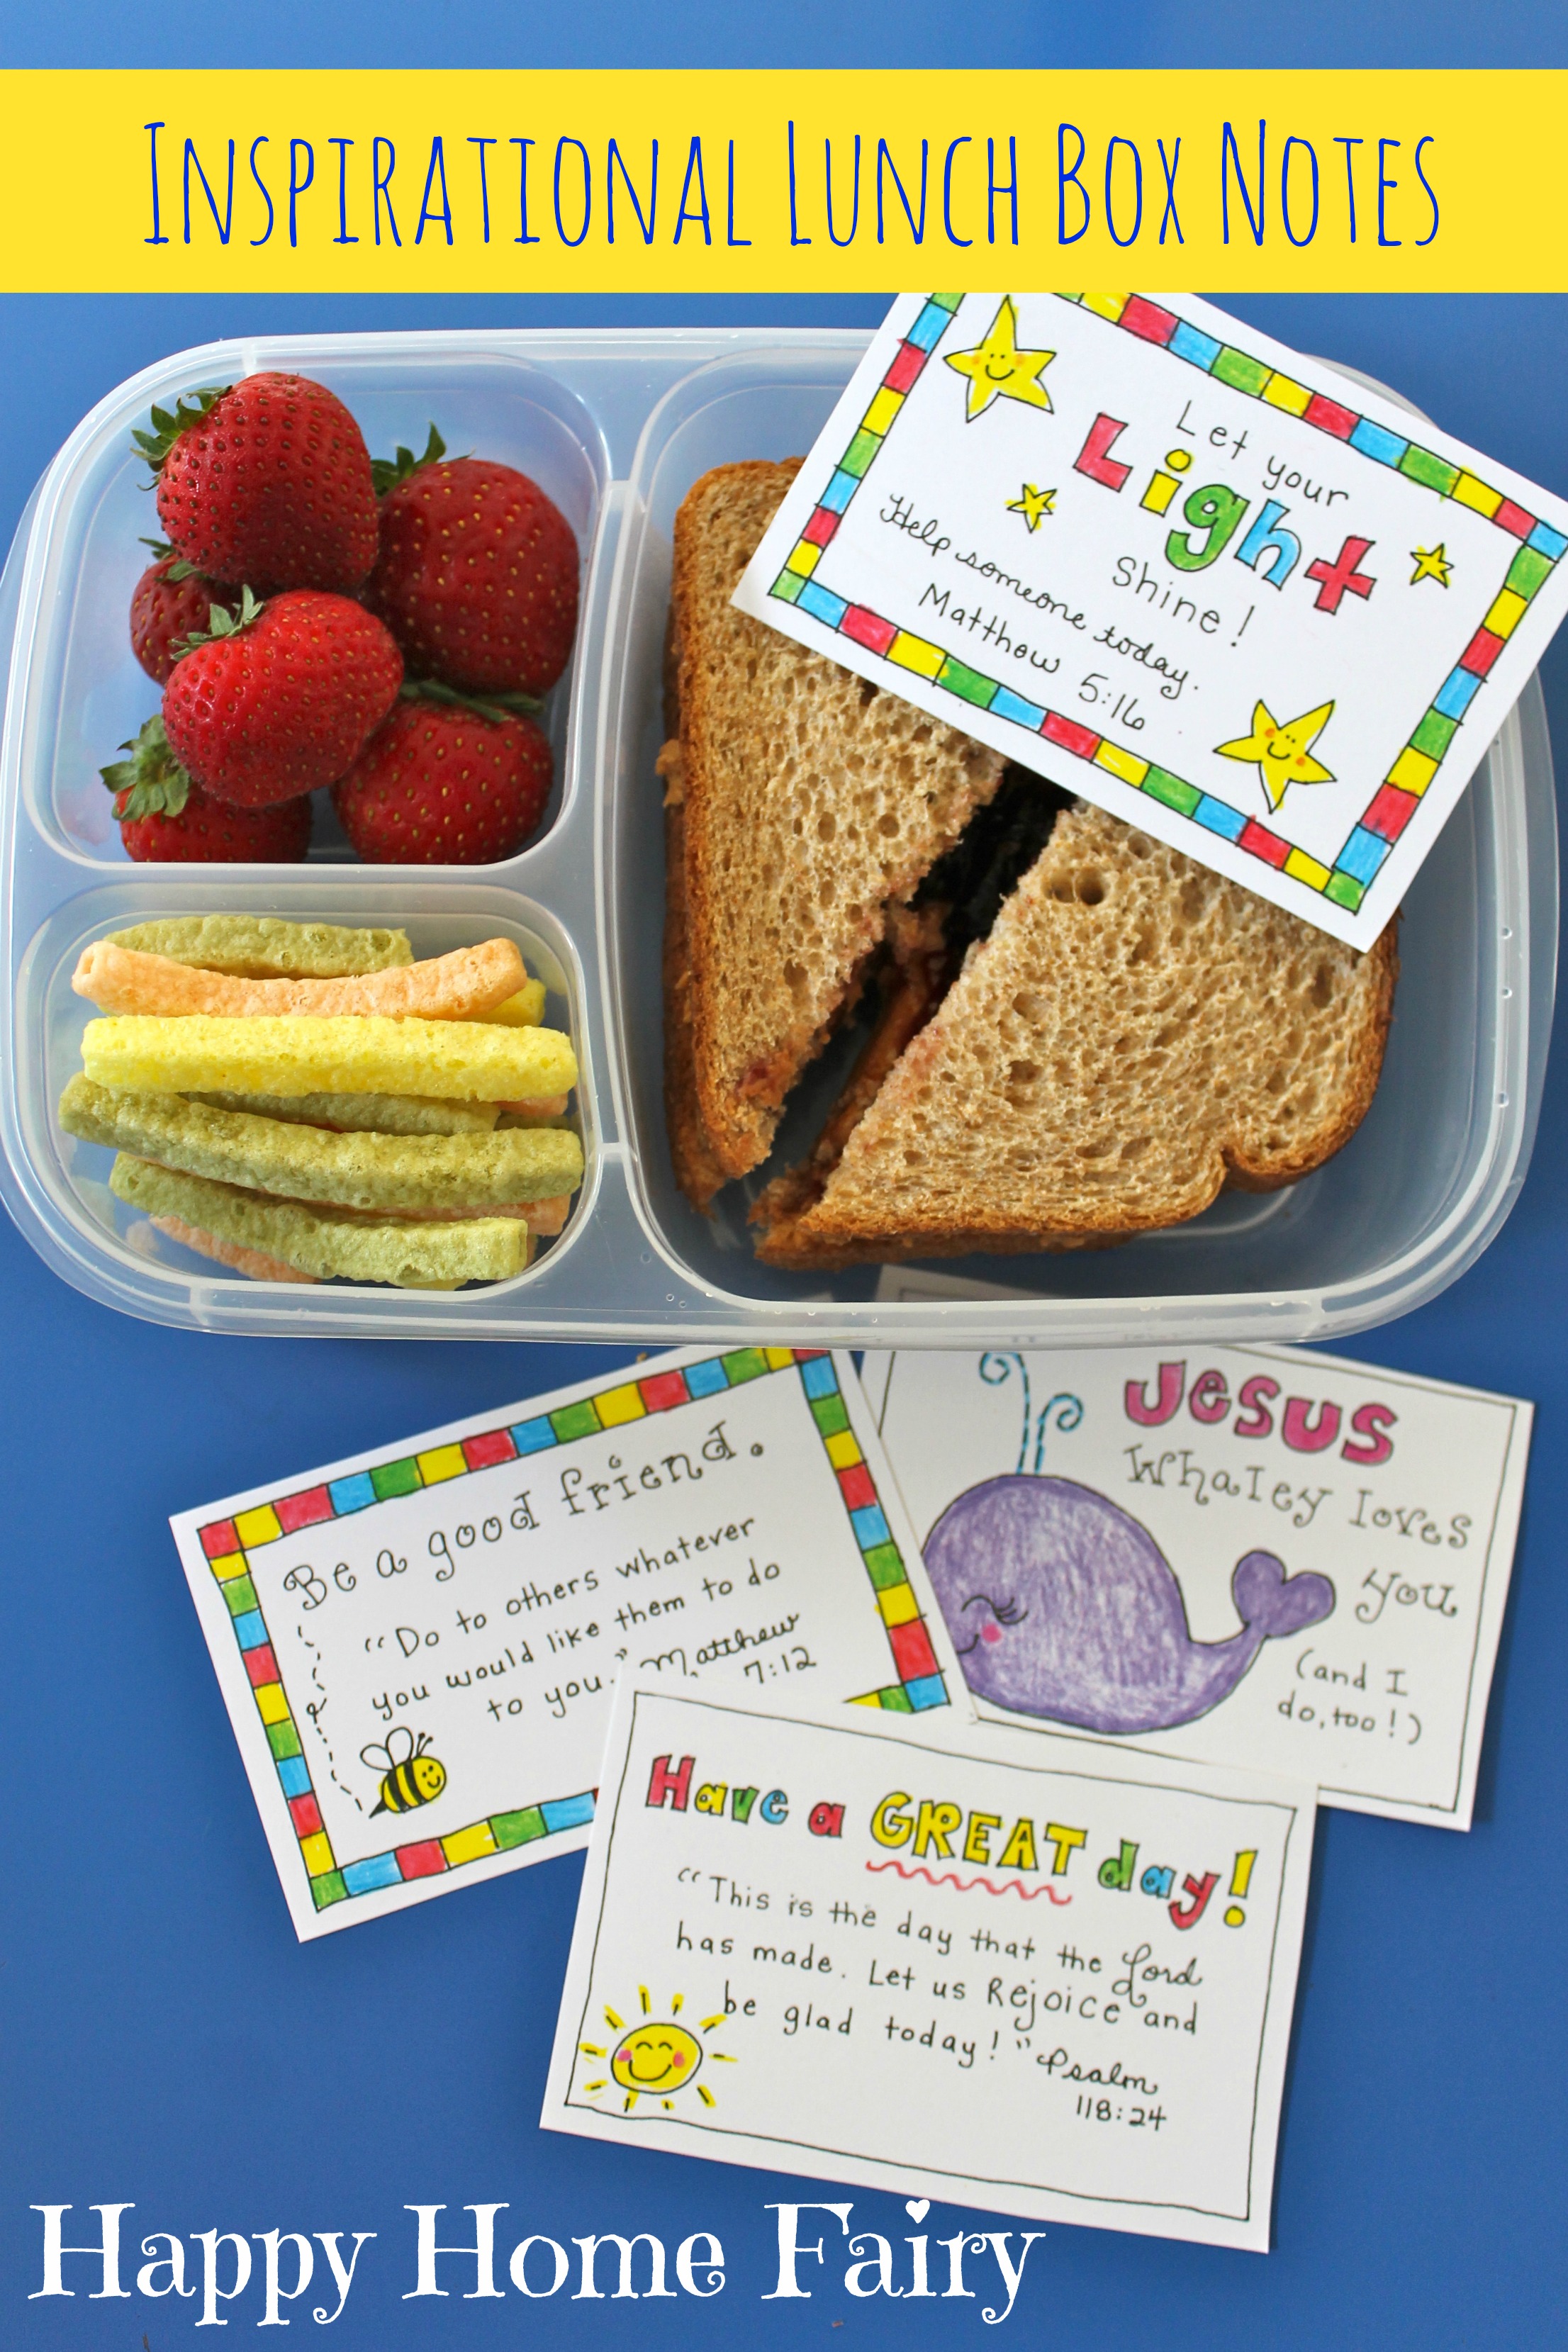 scratch off lunch box notes